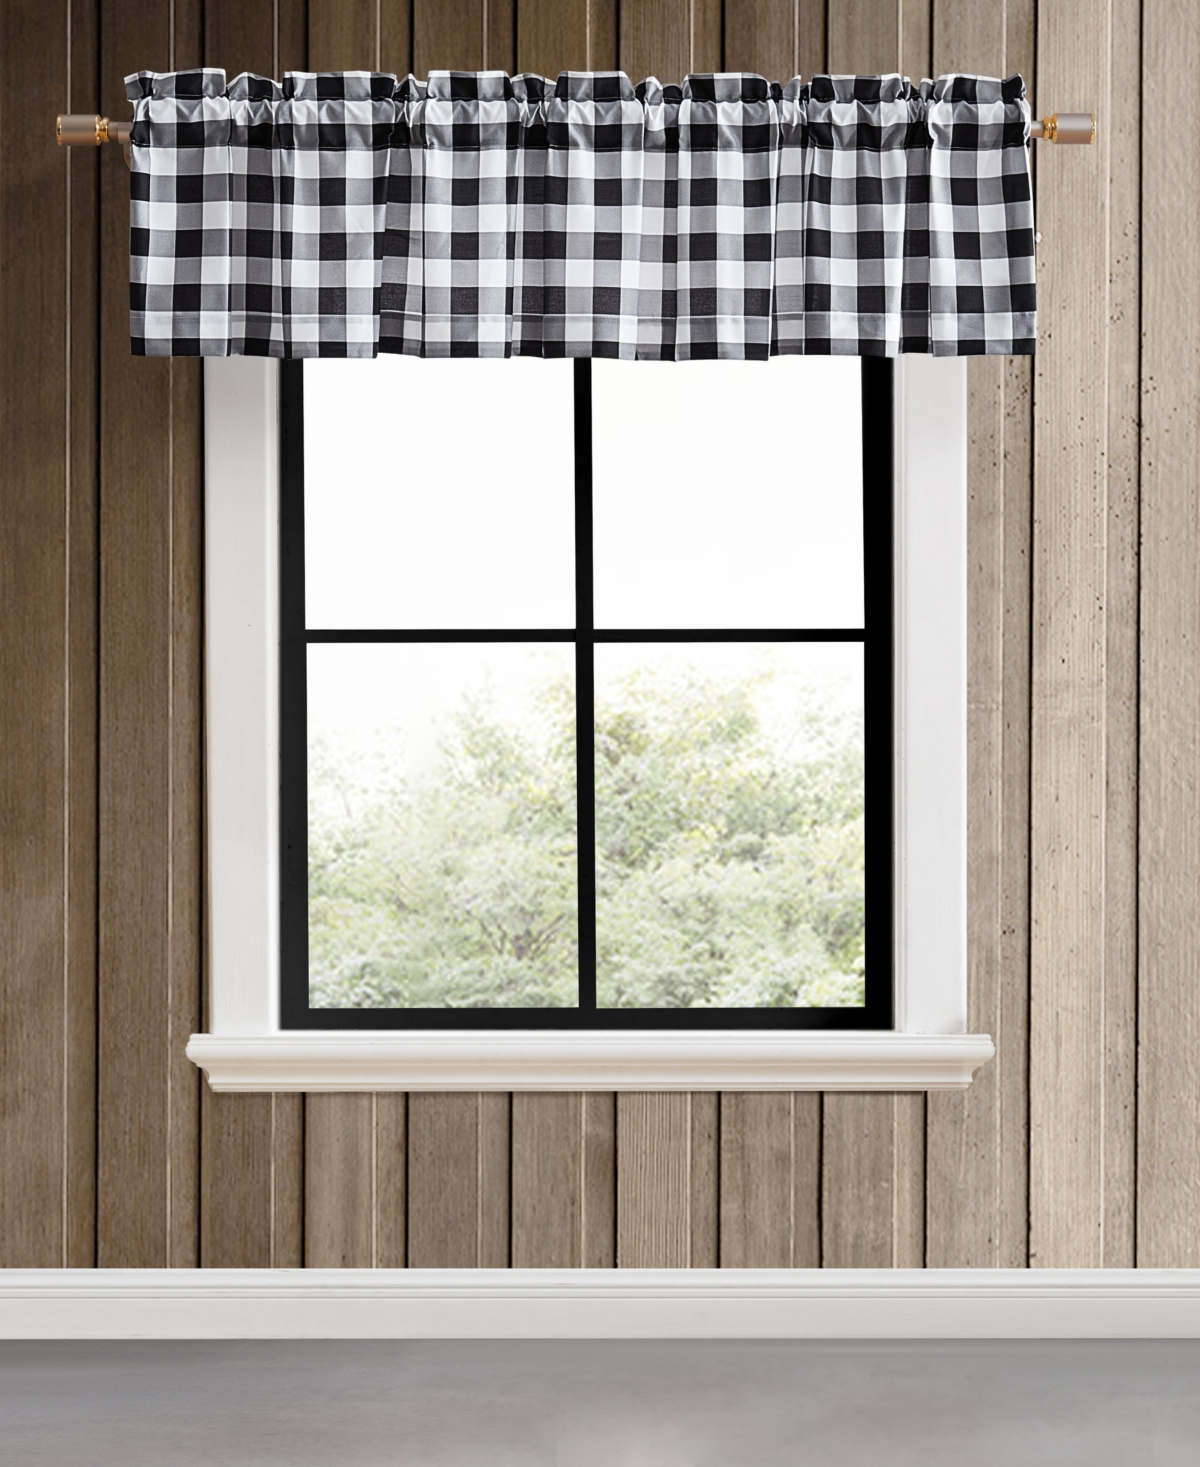 Pole Top Valance, 15"x 86" - Mountain Plaid Red